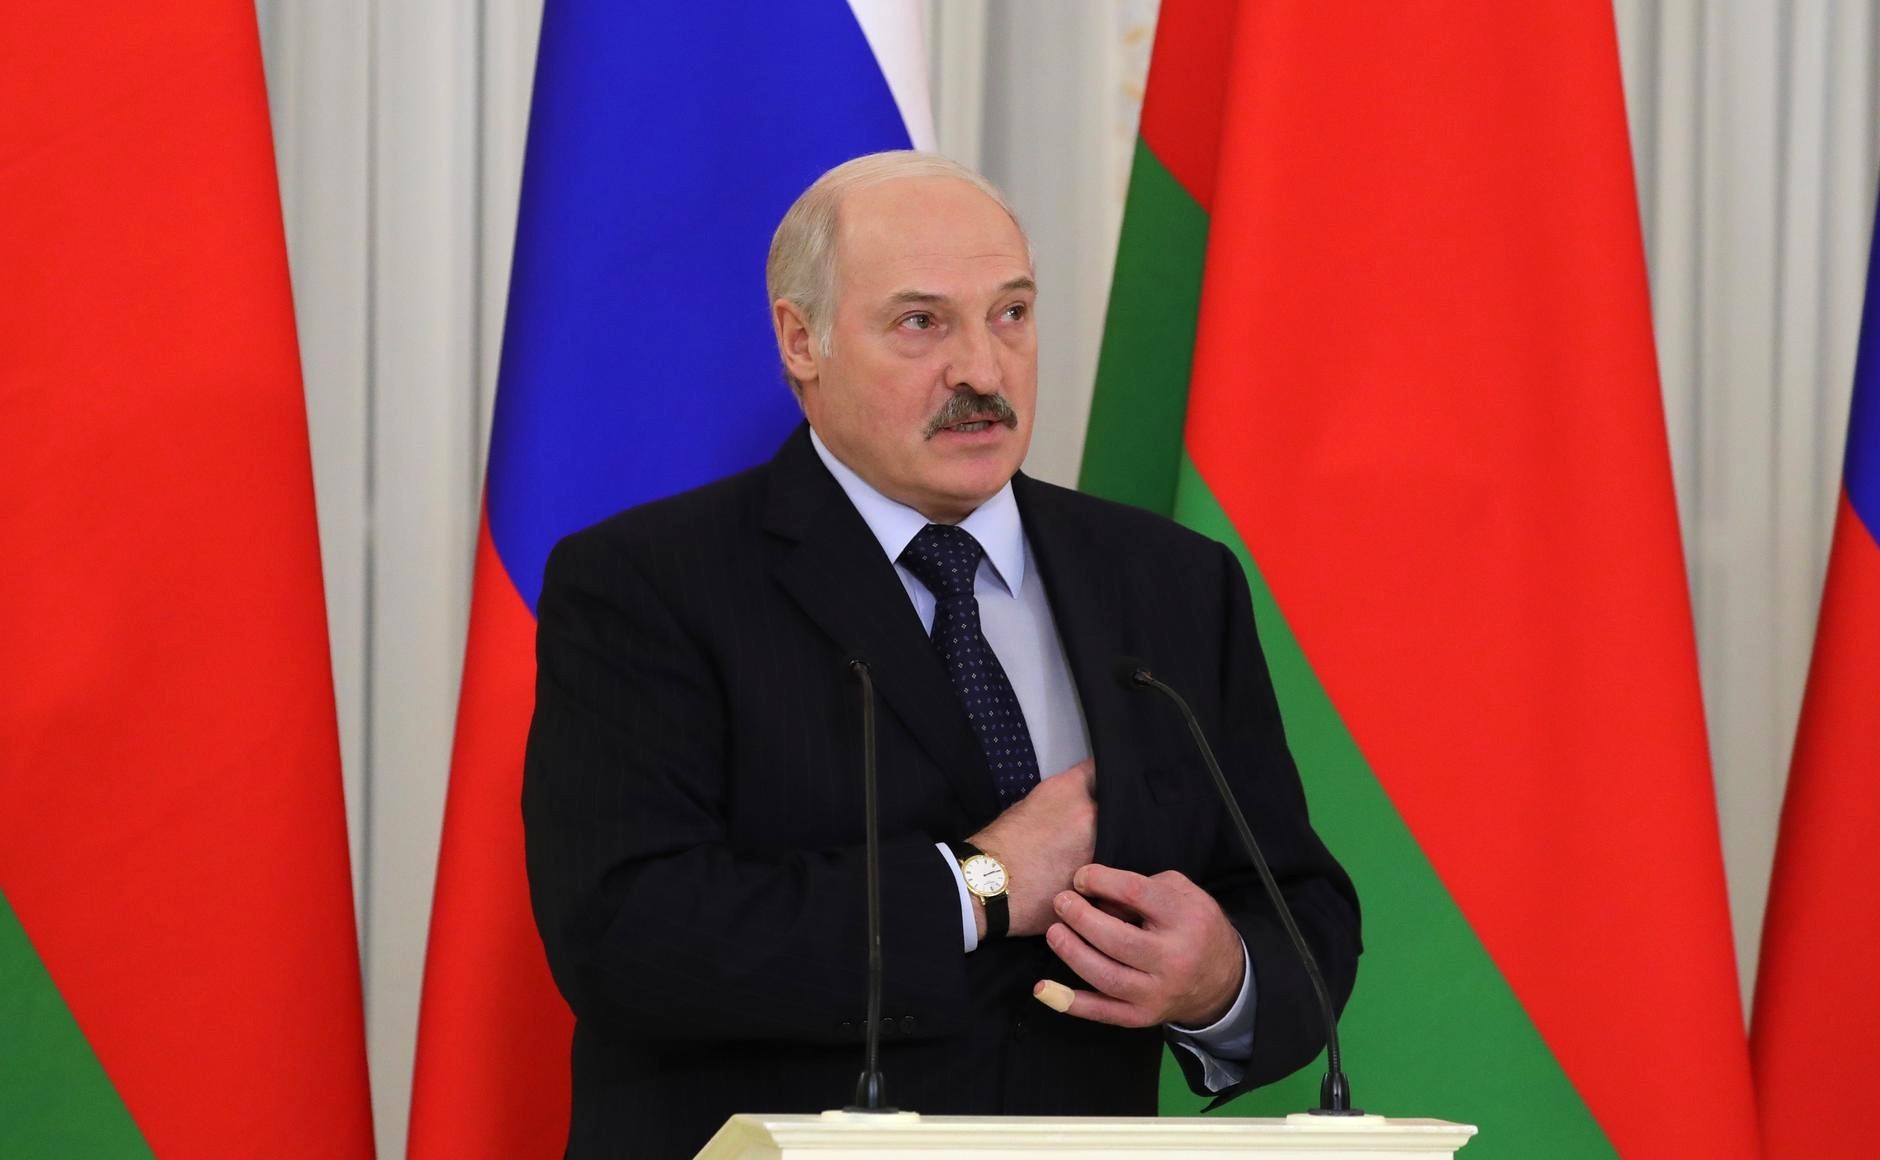 Belarus: The State in the Middle